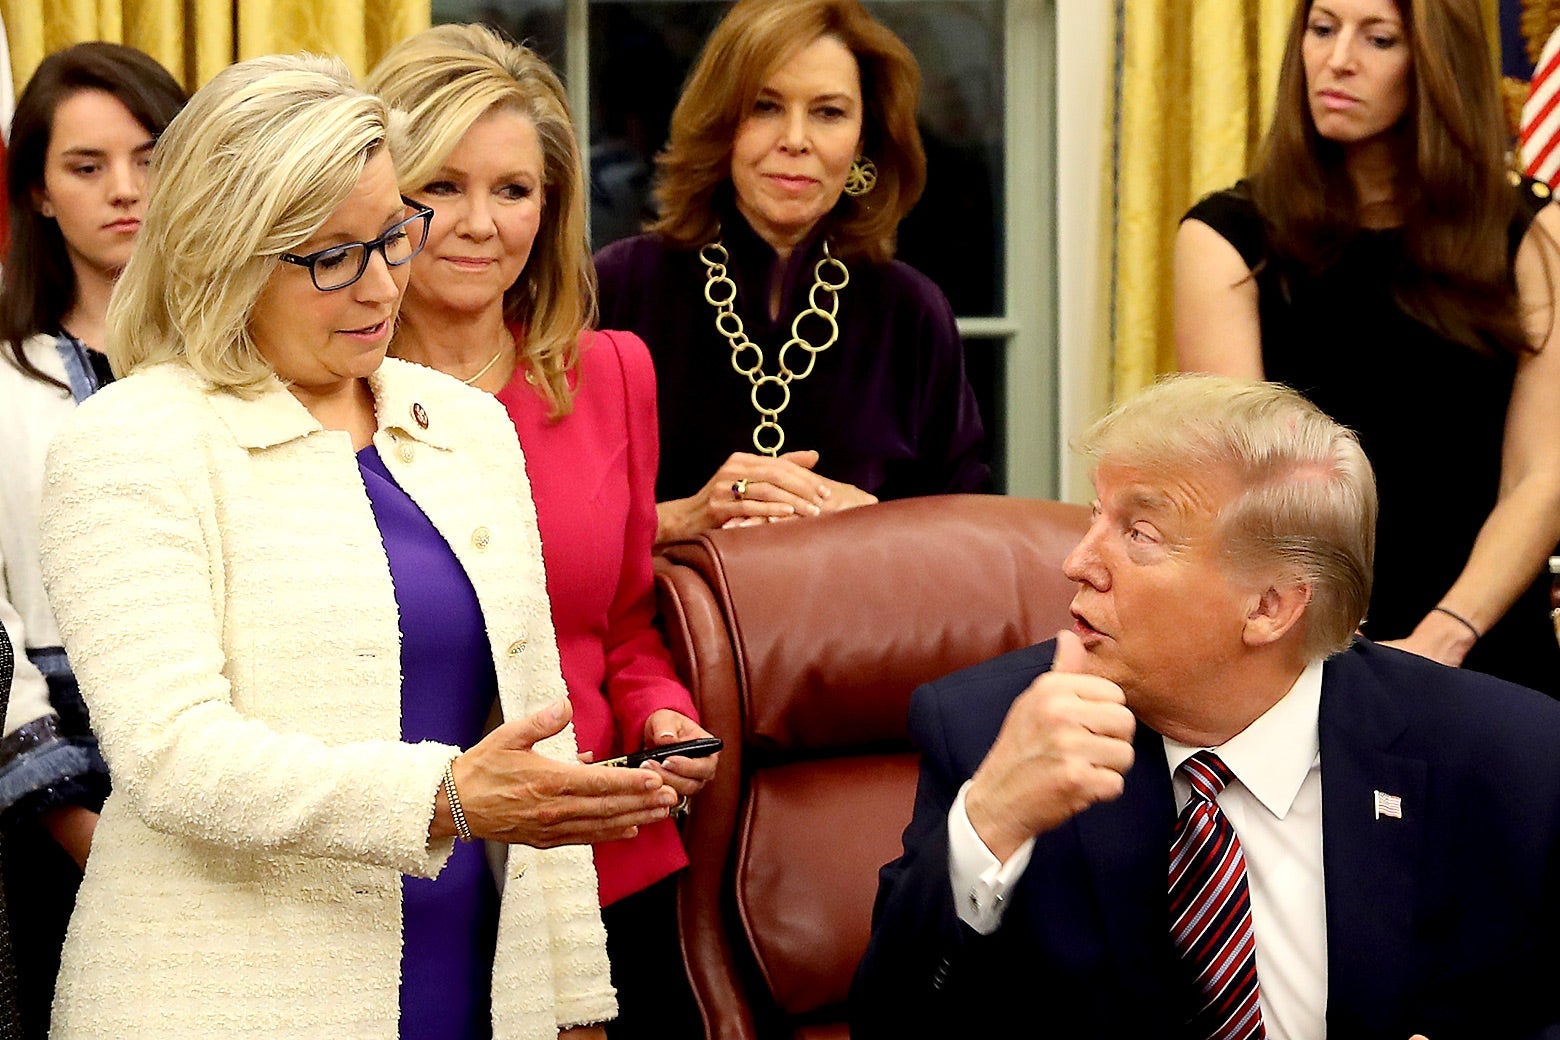 Liz Cheney, standing, speaks to Donald Trump, seated at the Resolute Desk. Several women stand behind them.